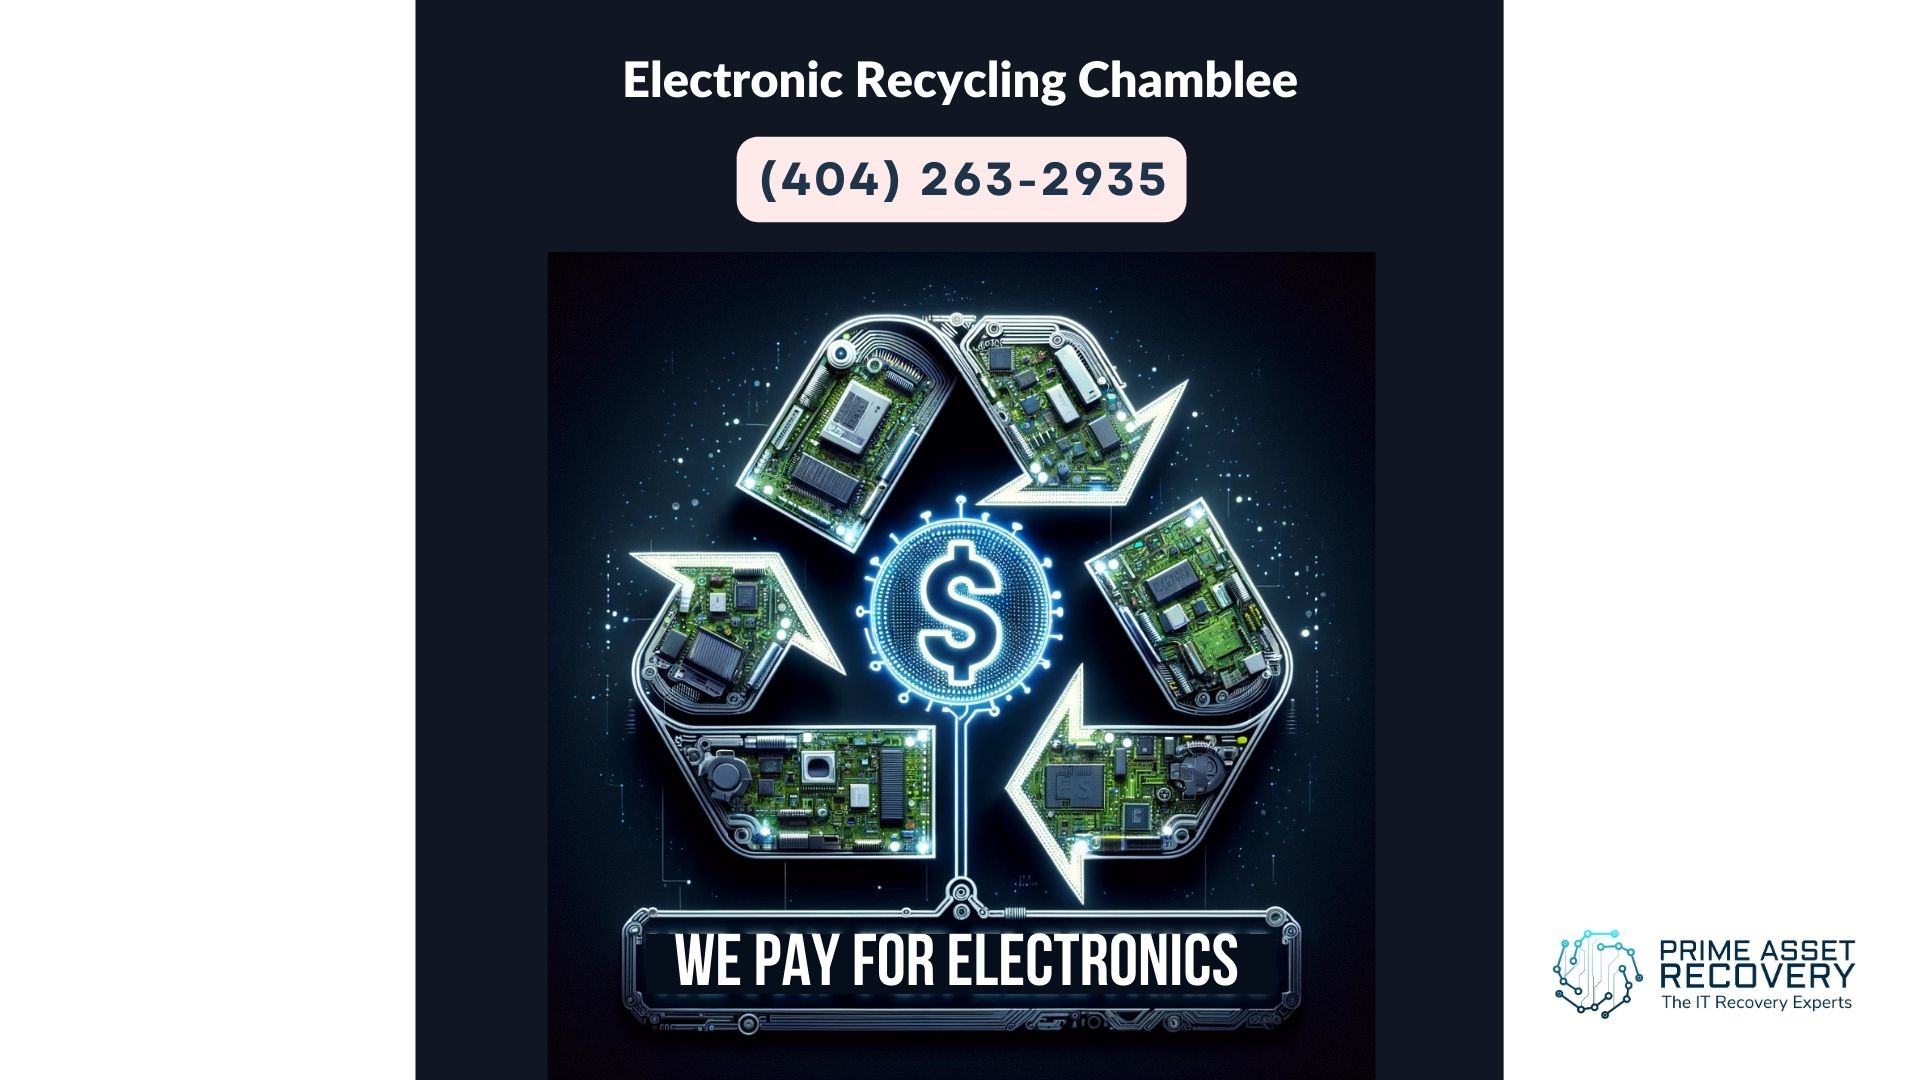 Computer Electronic Recycling Chamblee - Prime Asset Recovery Your Partner in Responsible Electronics Recycling